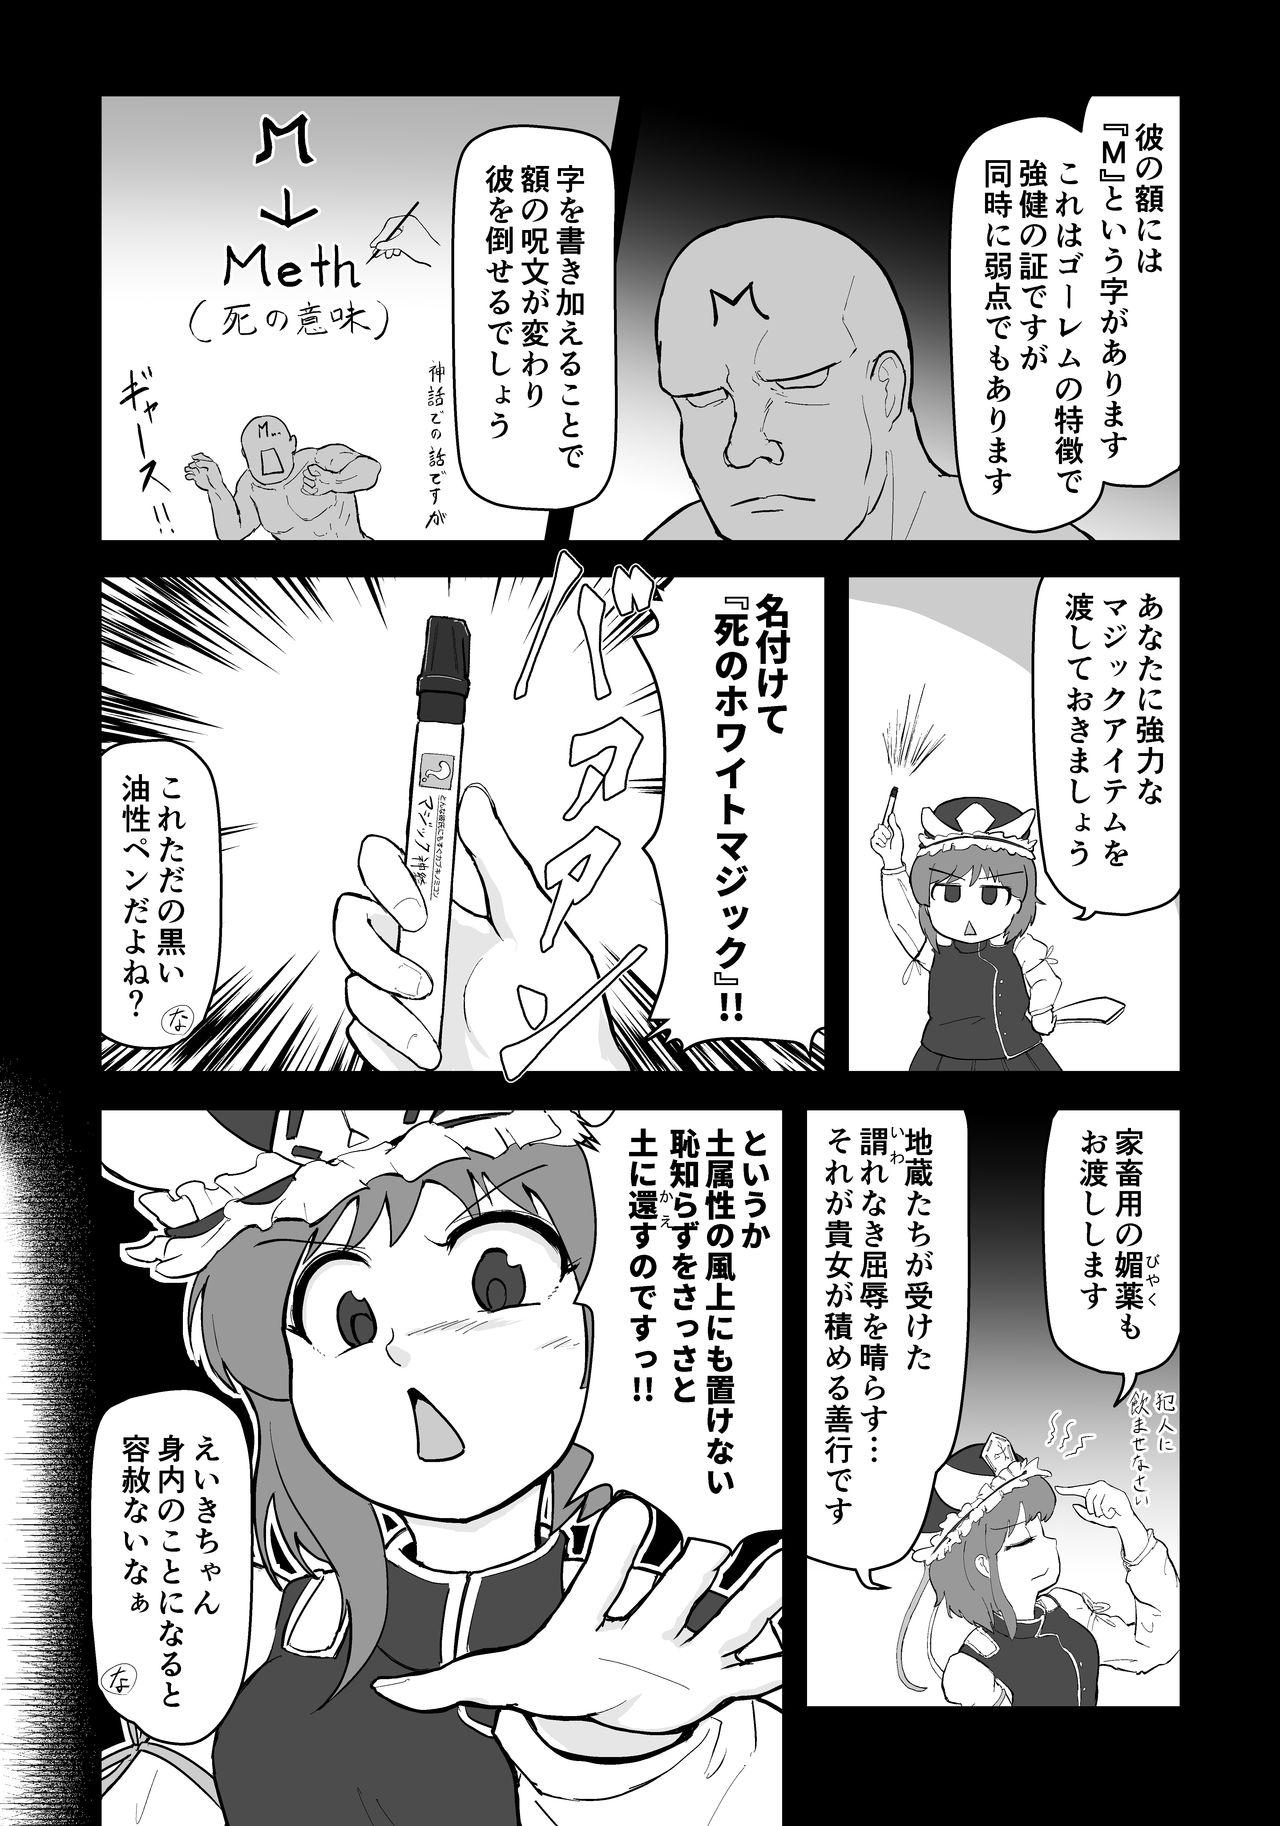 Married I will mash you ! - Touhou project Masturbating - Page 4